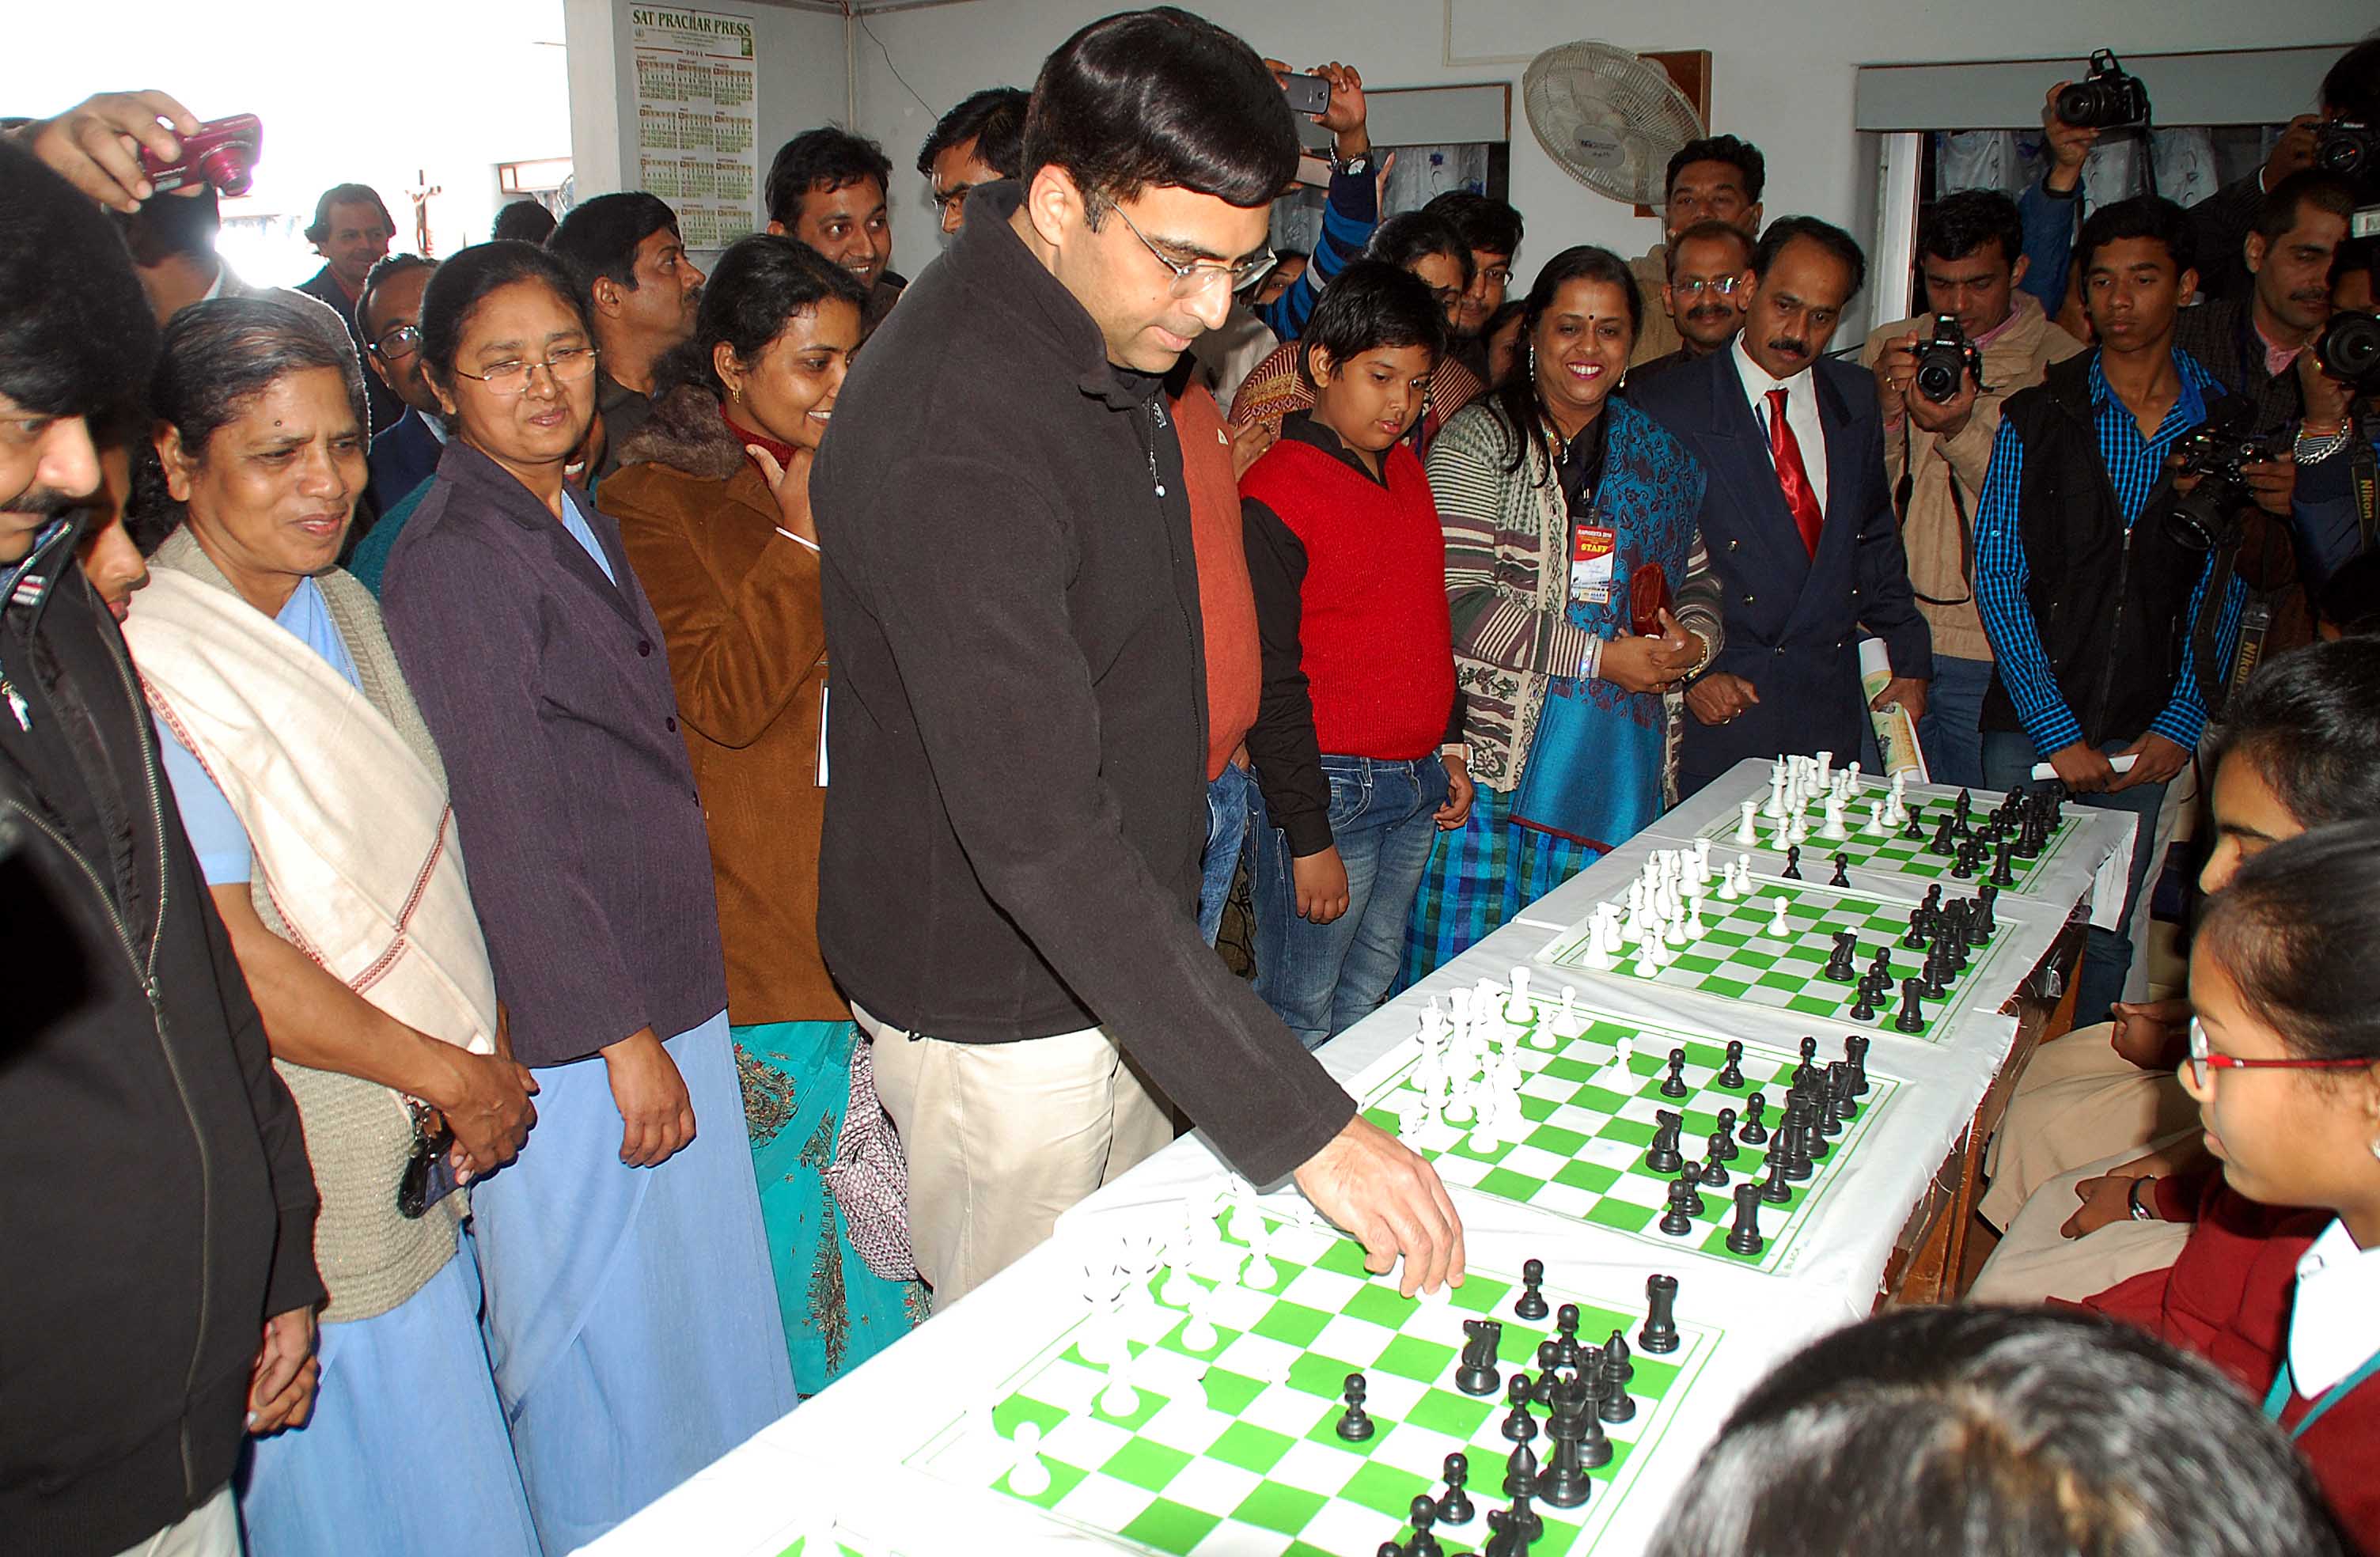 The changing landscape of Chess in India